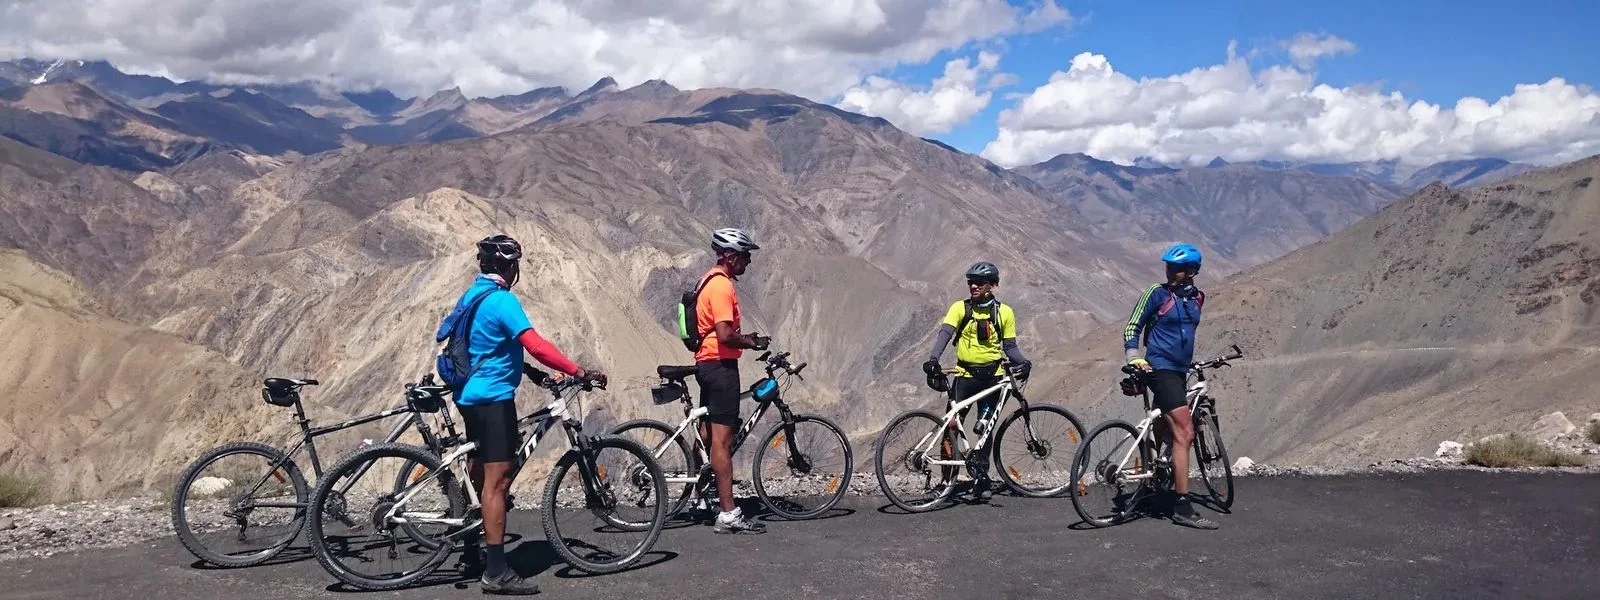 Cycle Tour in India